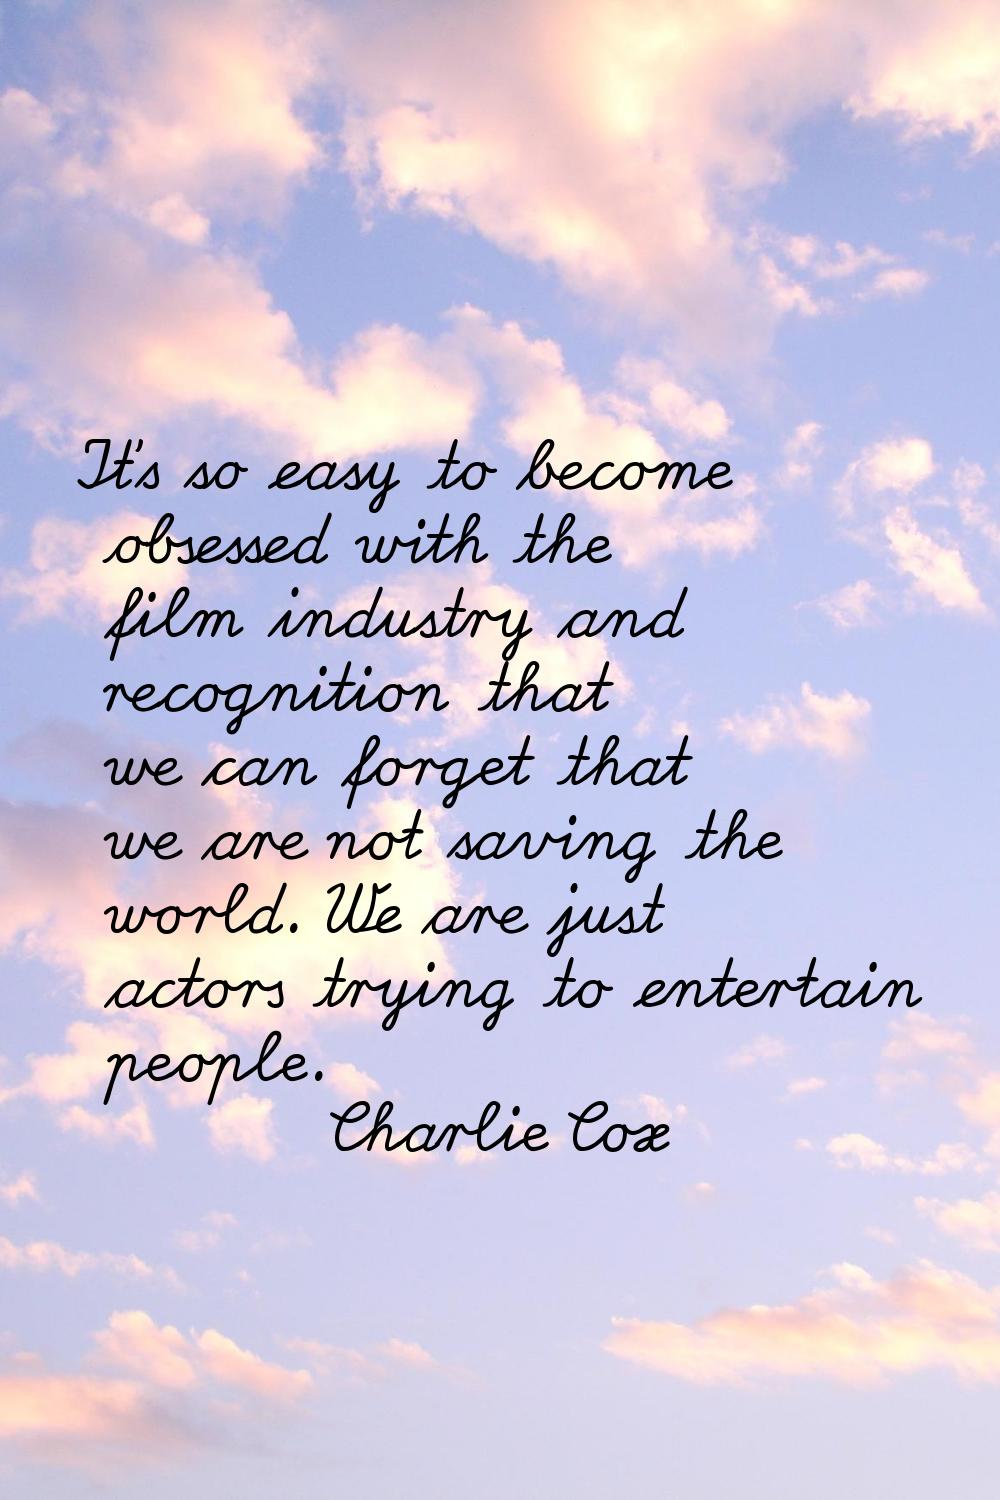 It's so easy to become obsessed with the film industry and recognition that we can forget that we a